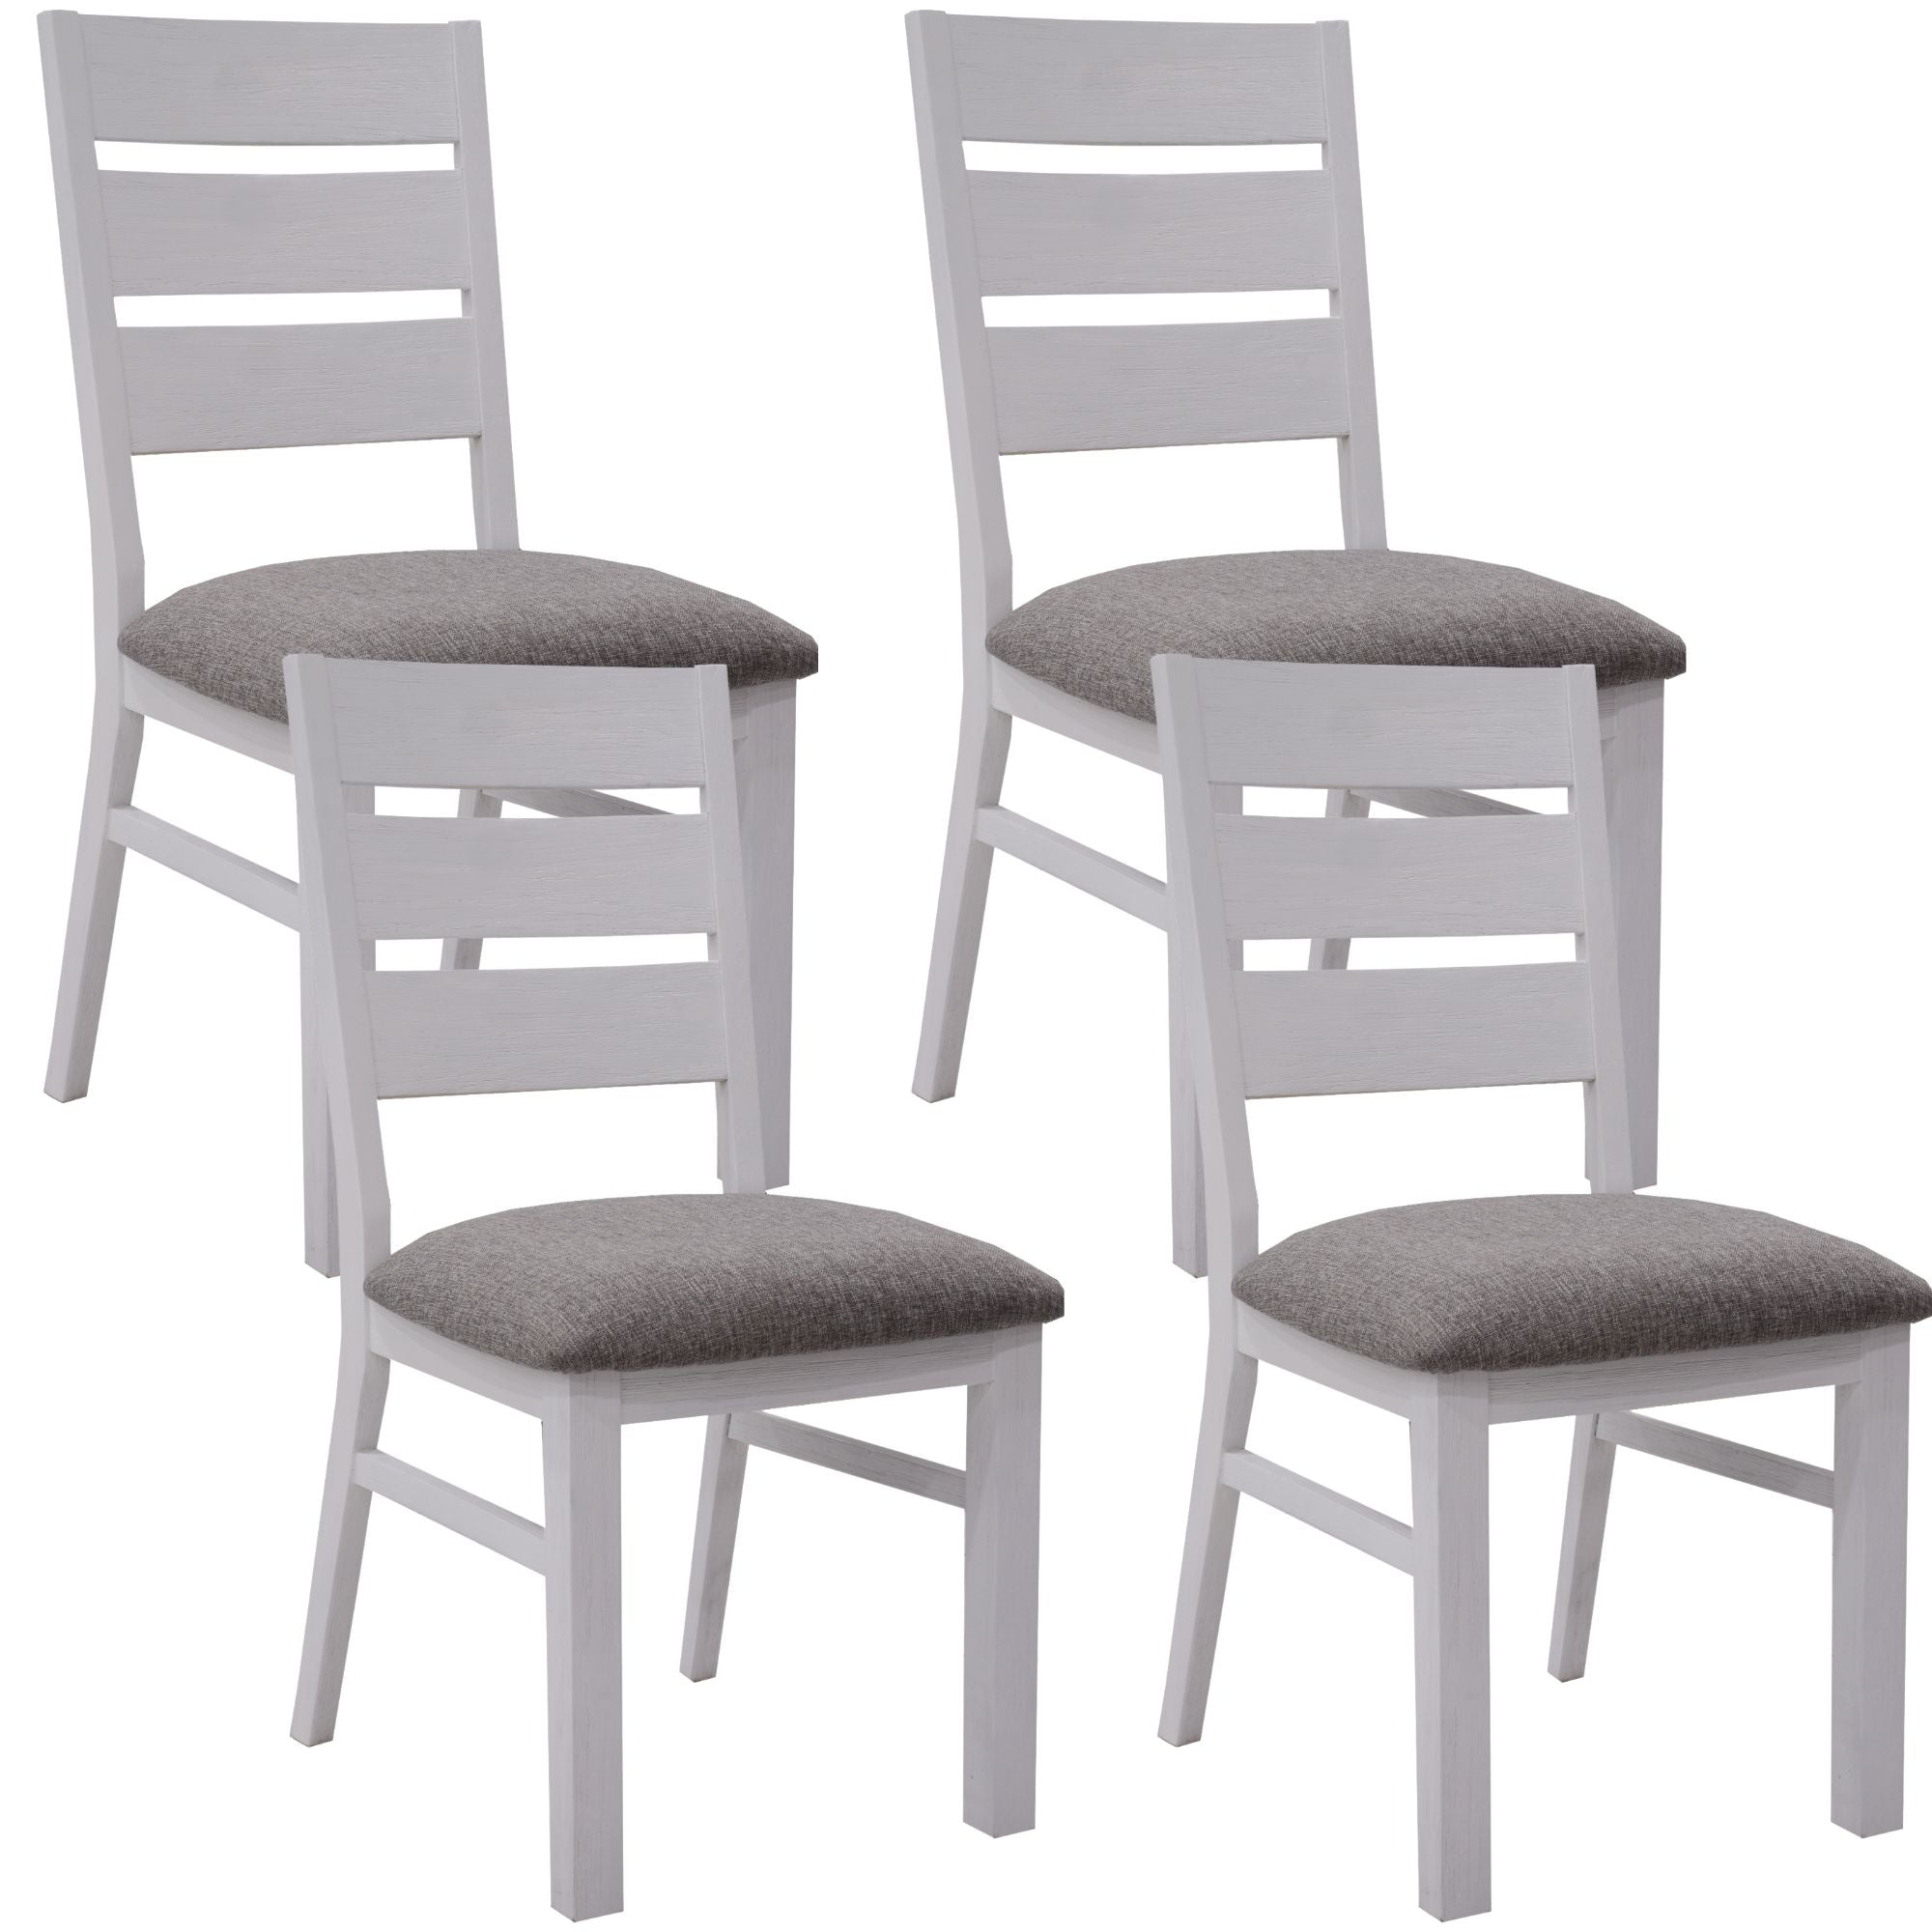 plumeria-dining-chair-set-of-4-solid-acacia-wood-dining-furniture-white-brush